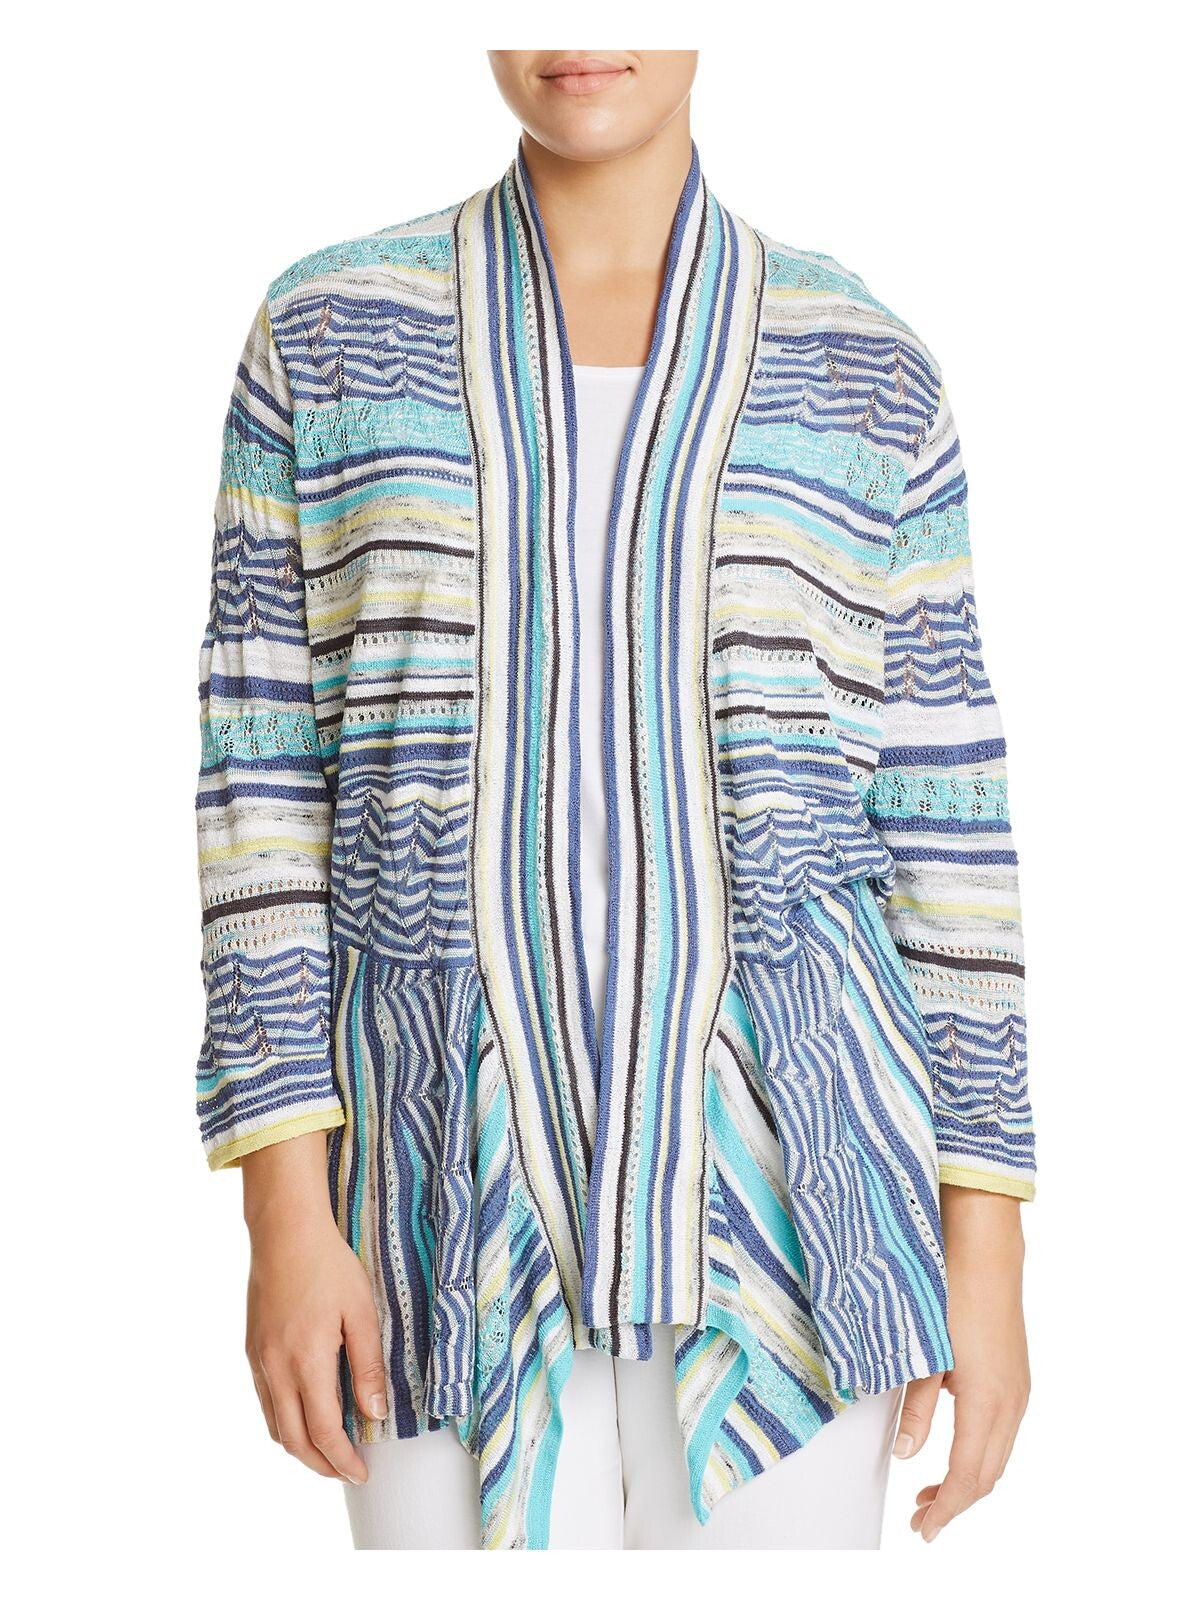 NIC+ZOE Womens Blue Knit Pocketed Stretch Lightweight Striped Open Cardigan Sweater Plus 3X